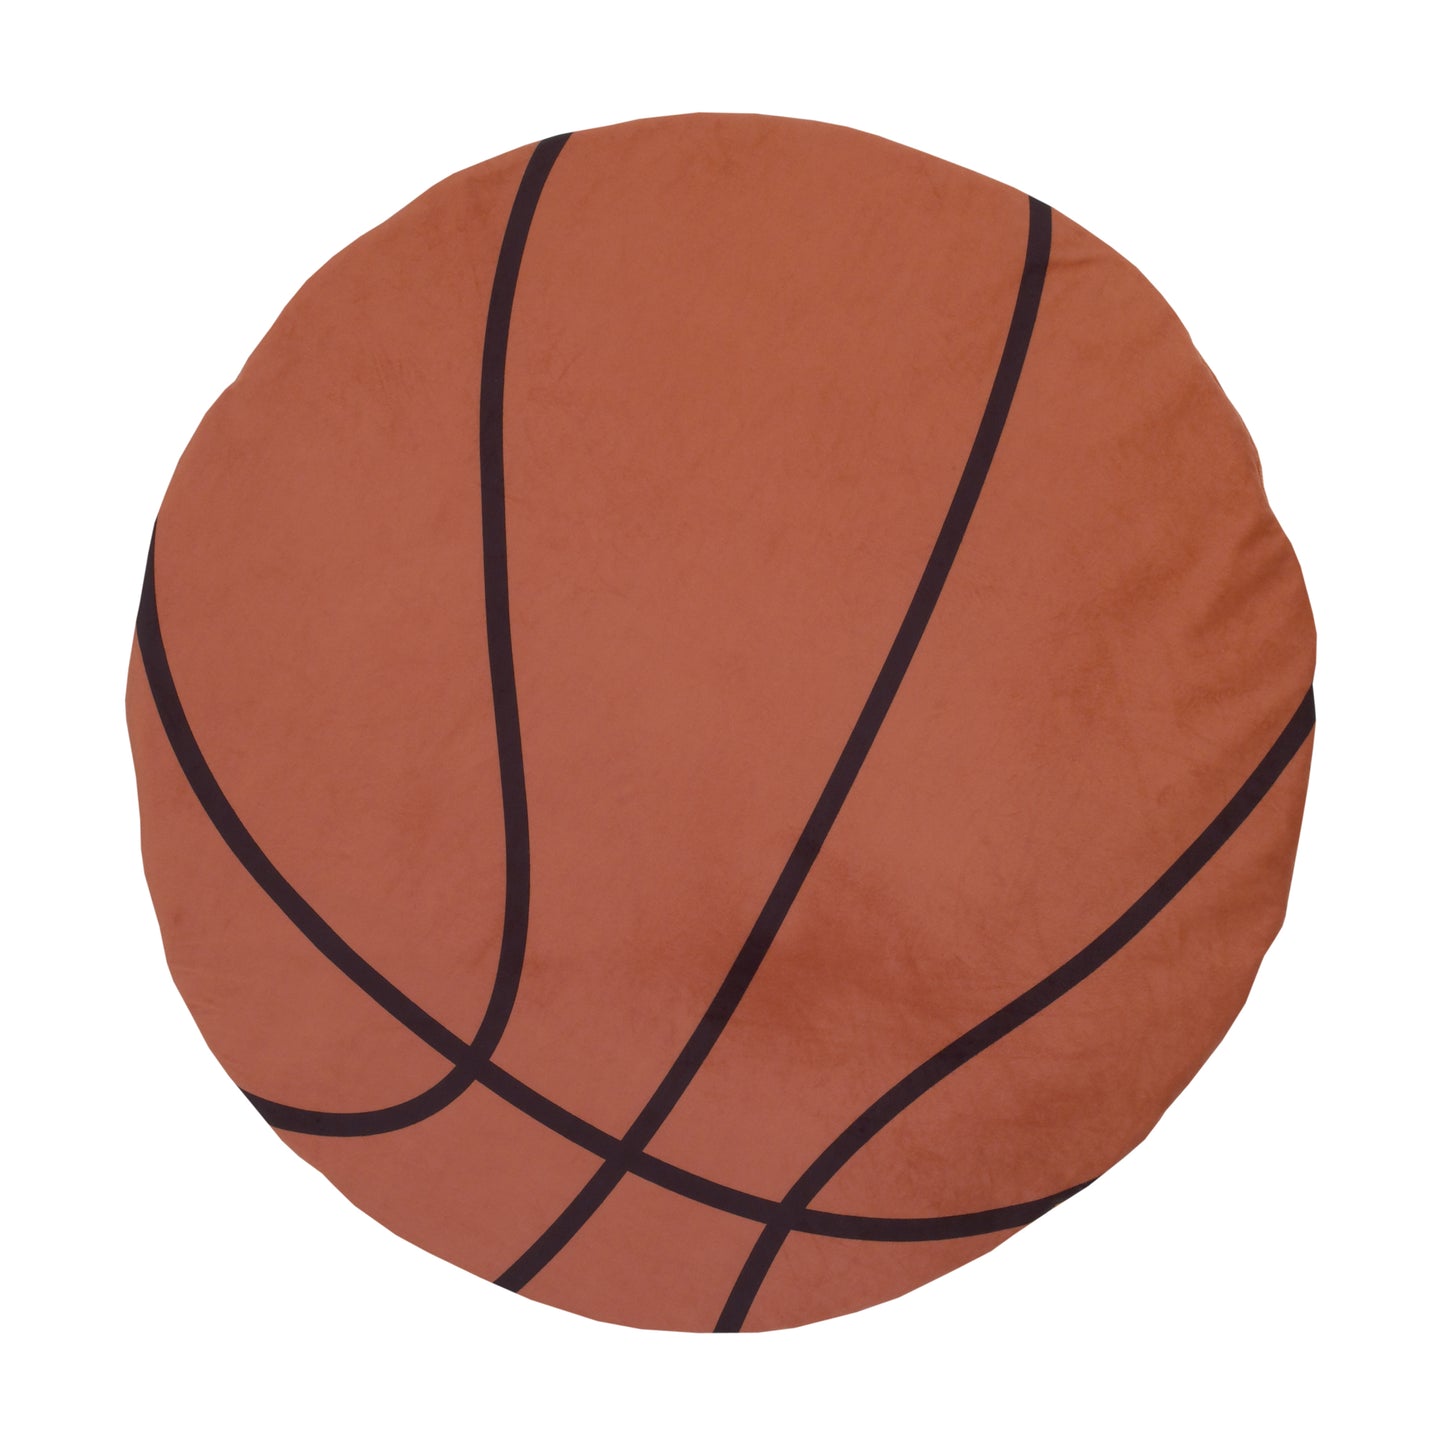 Little Love by NoJo Brown and Black Basketball Super Soft Round Tummy Time Playmat